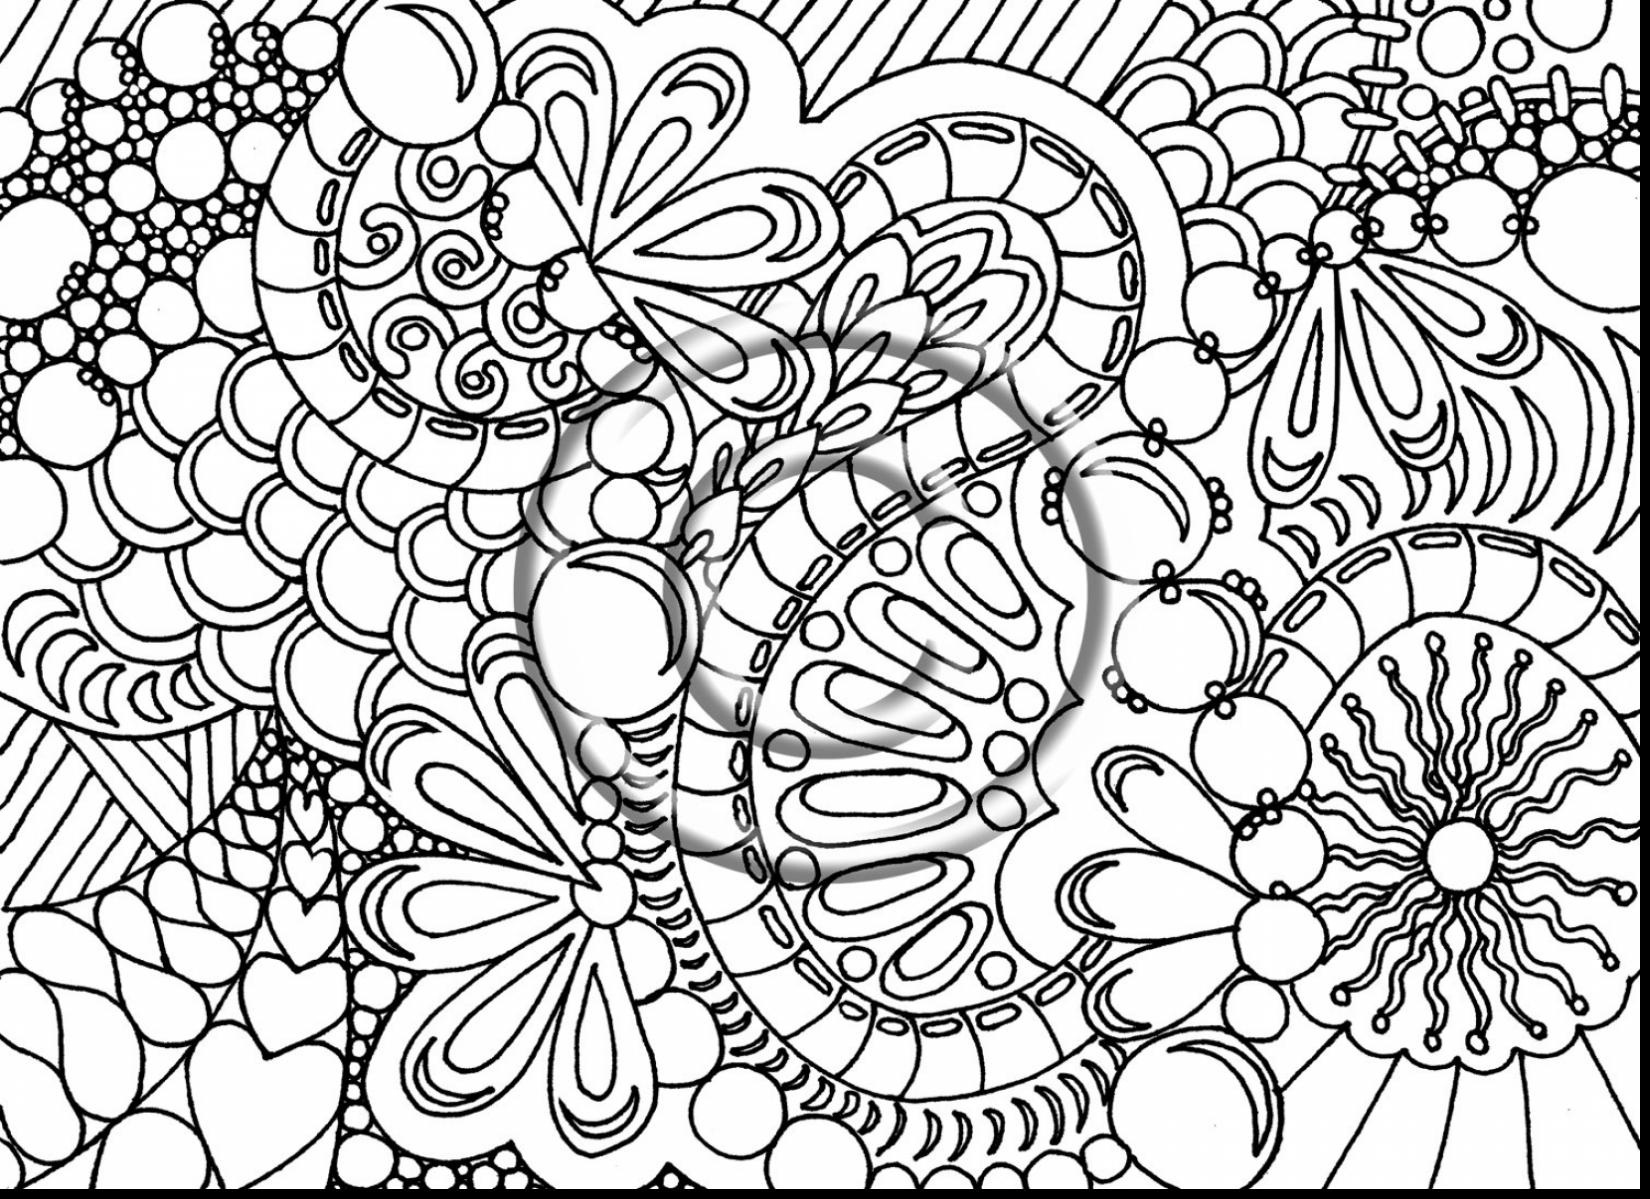 Coloring ~ Coloring Free Printable Pages For Adults Pdf Ideas Pagers - Free Printable Coloring Pages For Adults Pdf